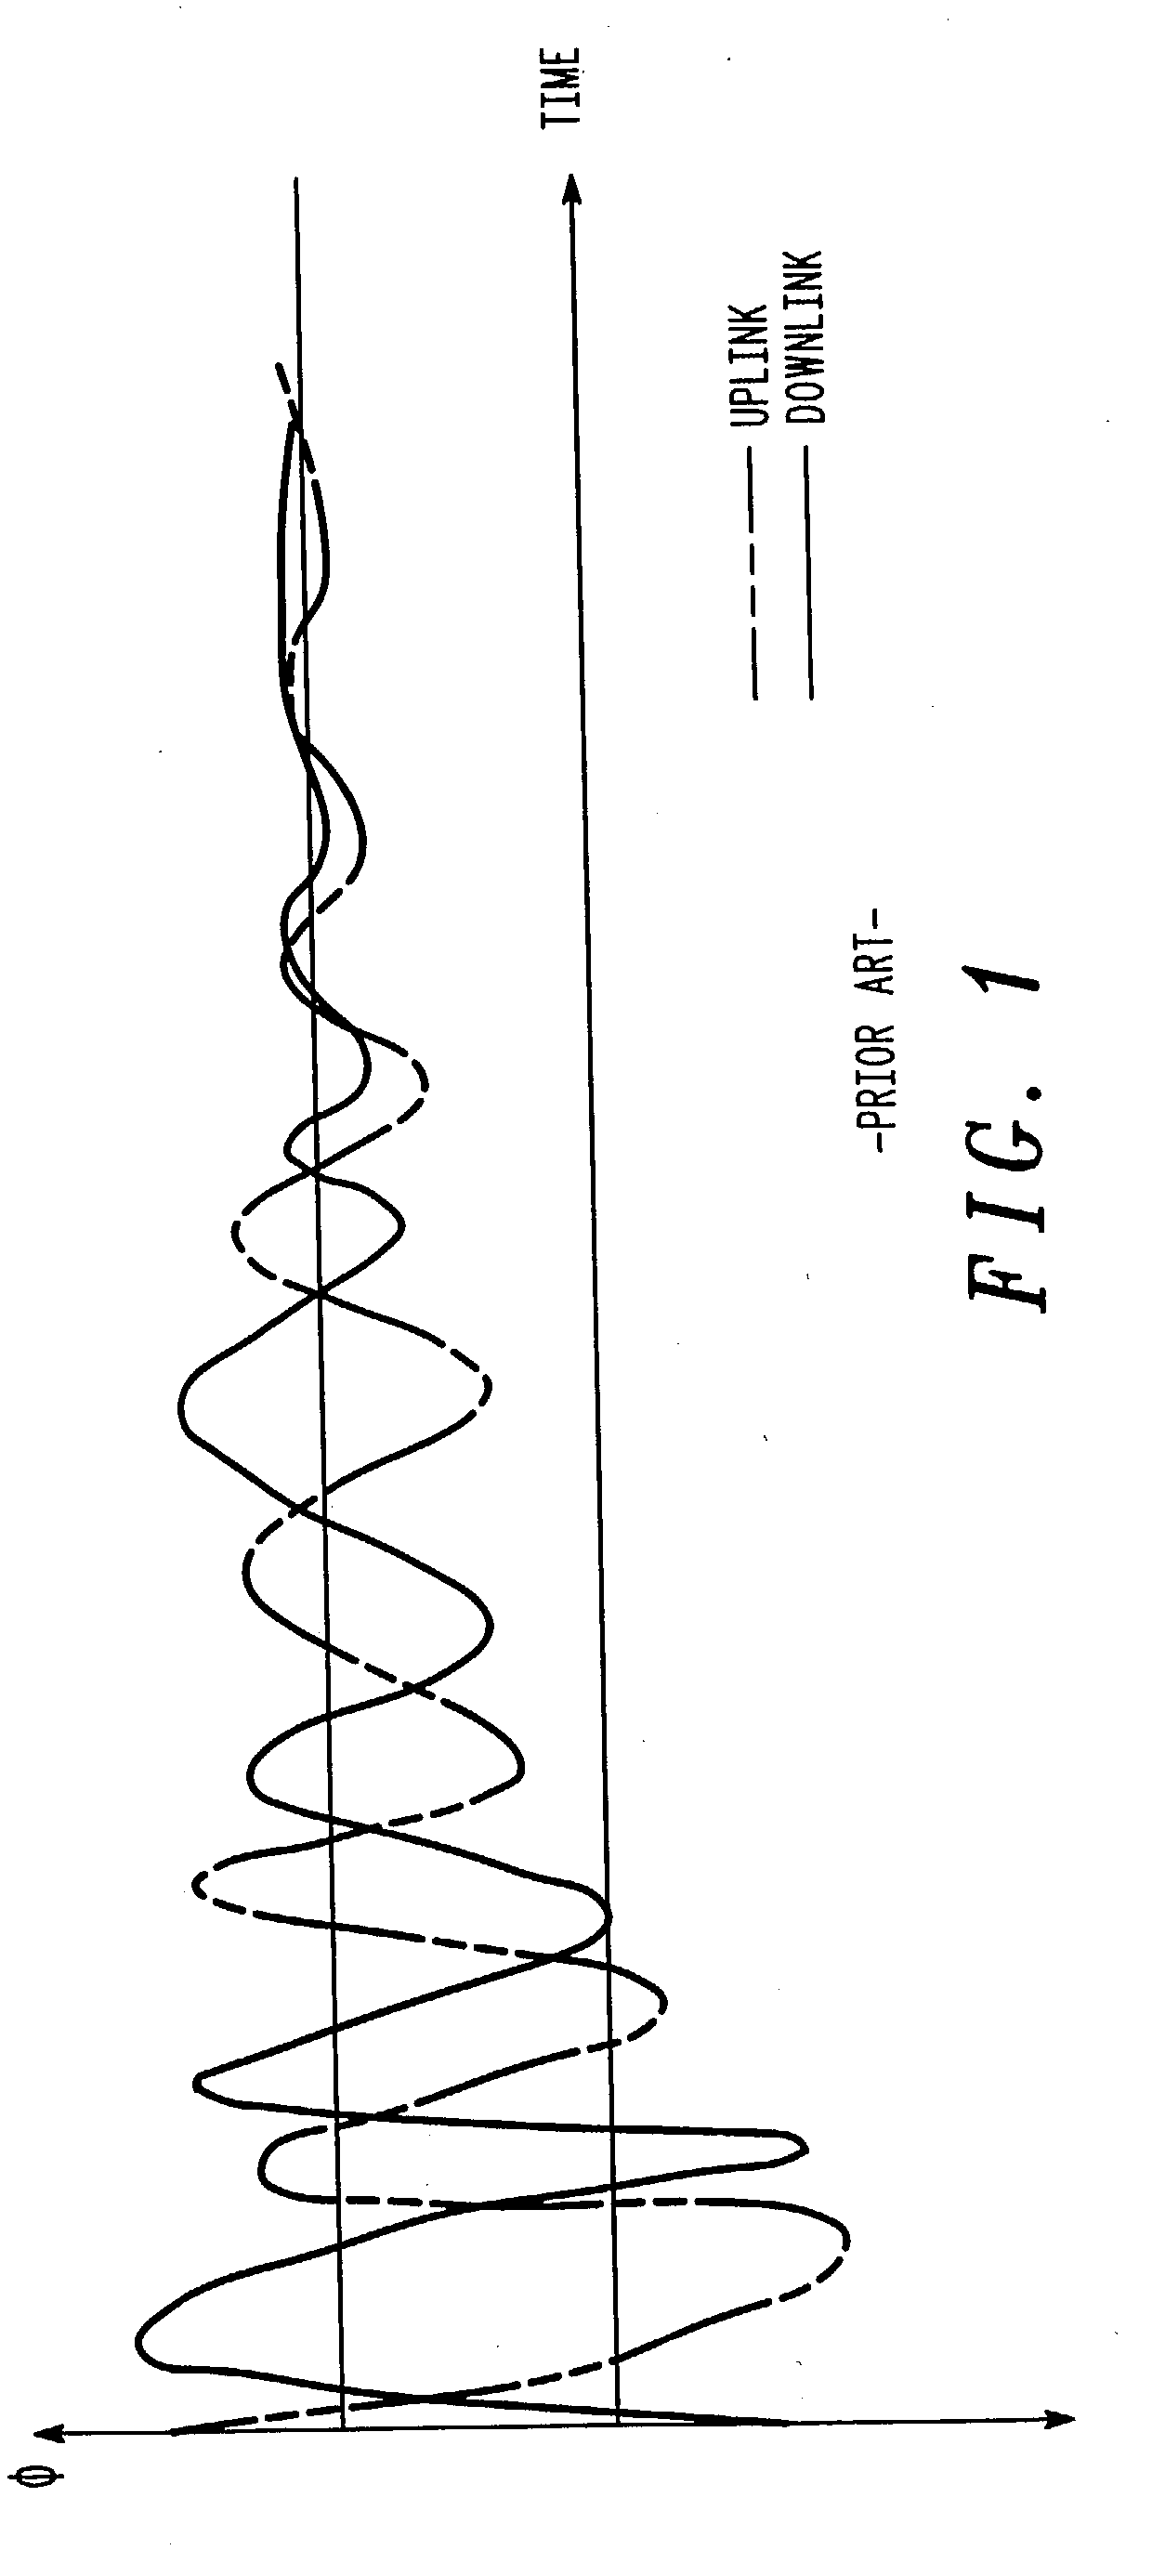 Adaptive antenna array and method of controlling operation thereof